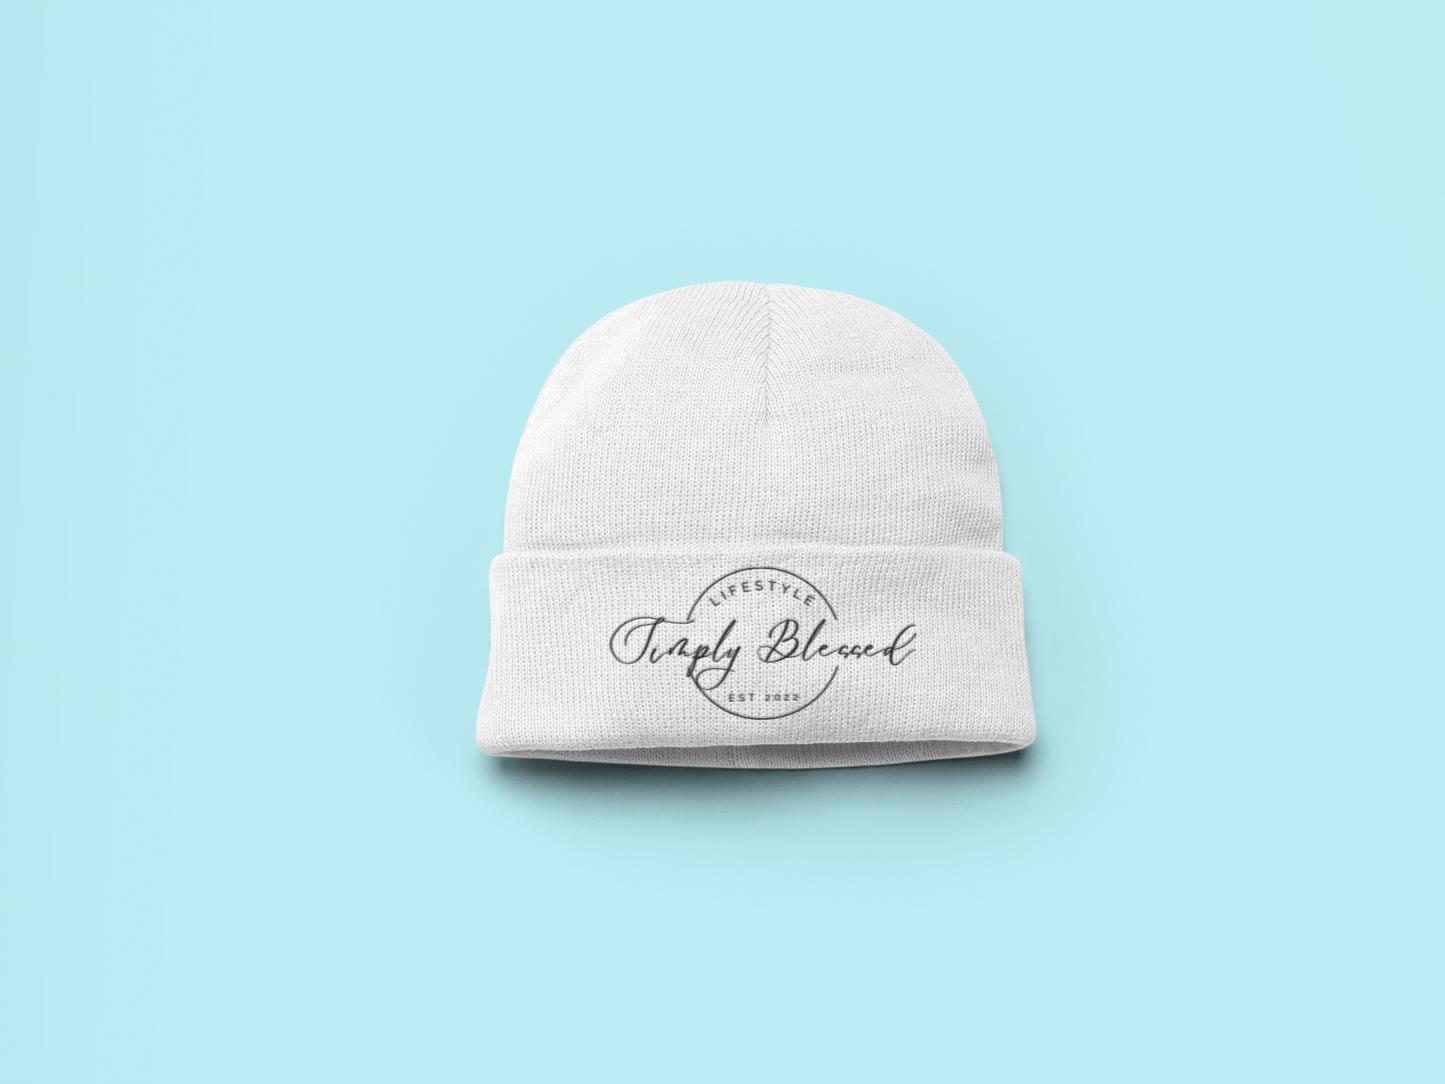 Simply Blessed LifeStyle Head Gear